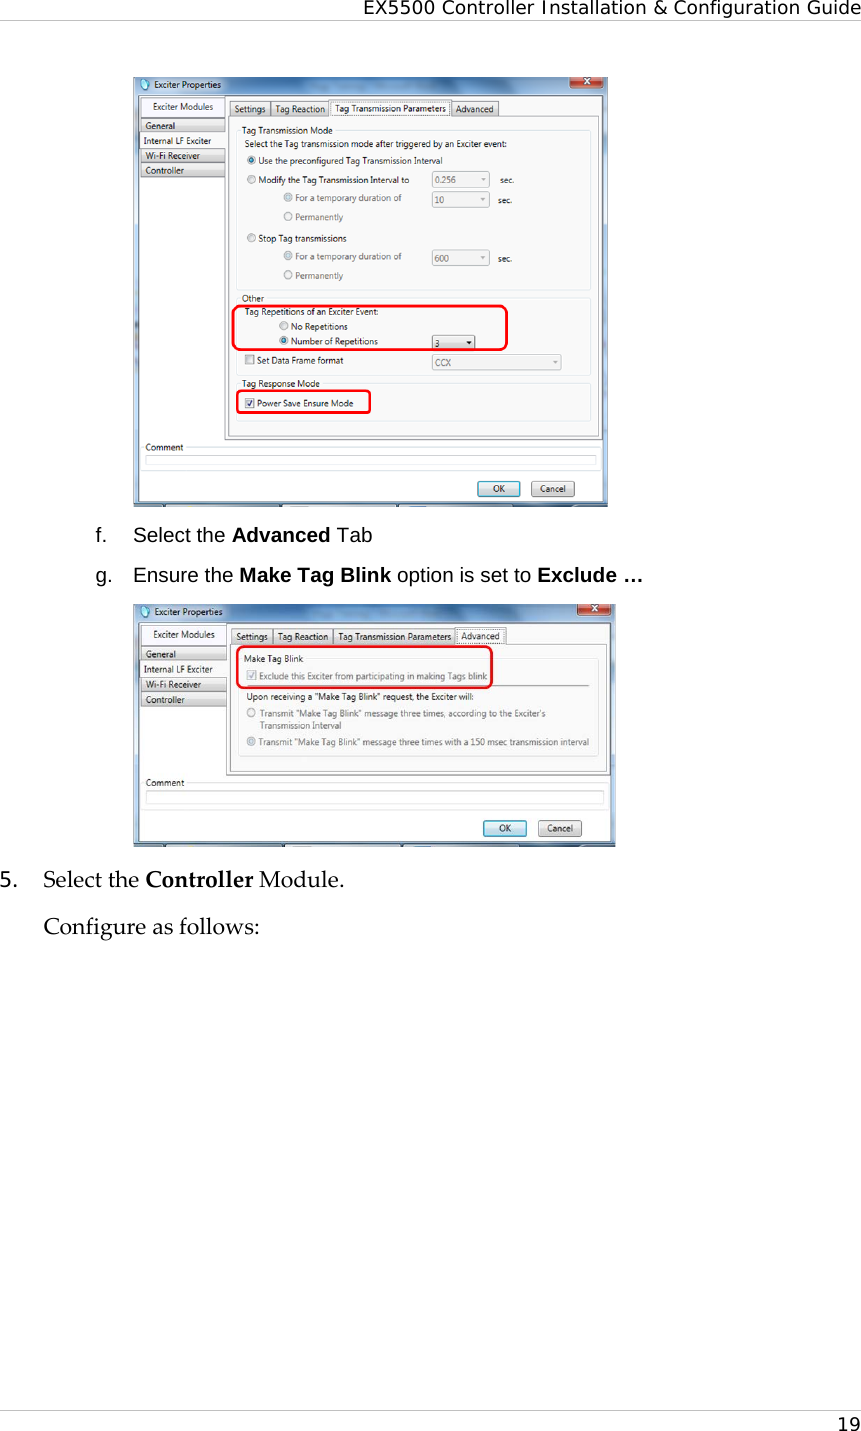 EX5500 Controller Installation &amp; Configuration Guide   19  f. Select the Advanced Tab g. Ensure the Make Tag Blink option is set to Exclude …   5. Select the Controller Module. Configure as follows: 